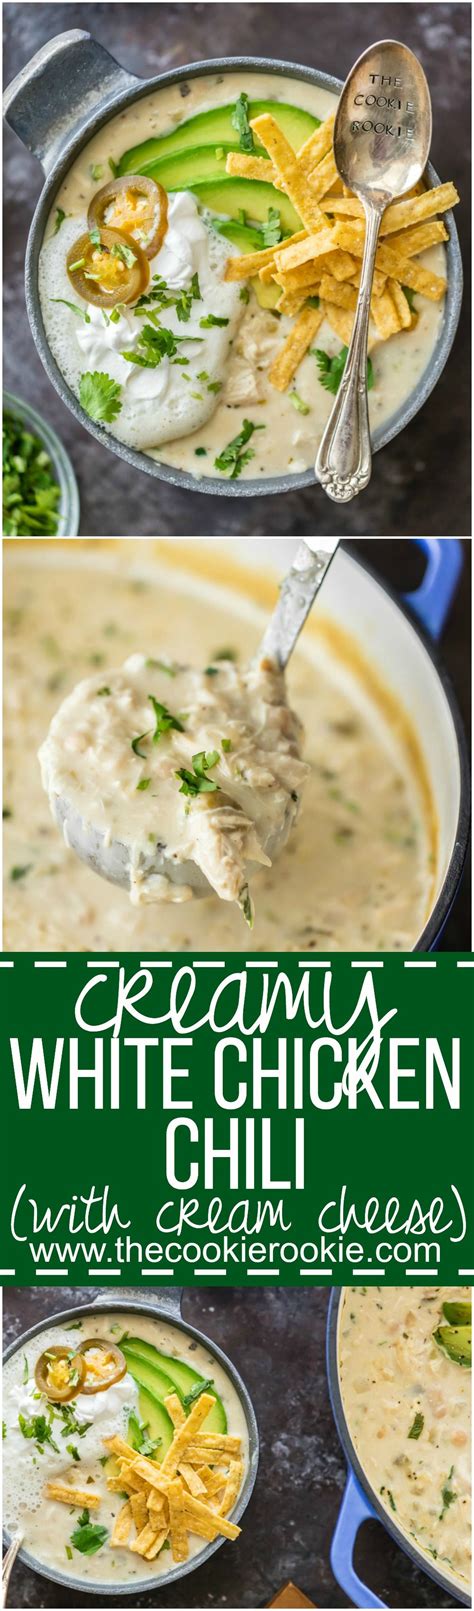 For the cooked chicken, poach 3 or 4 skinned and boned chicken breast halves in boiling water or chicken broth, covered, for about 12 minutes or until no pink remains (170°f). CREAMY WHITE CHICKEN CHILI made with CREAM CHEESE is the ...